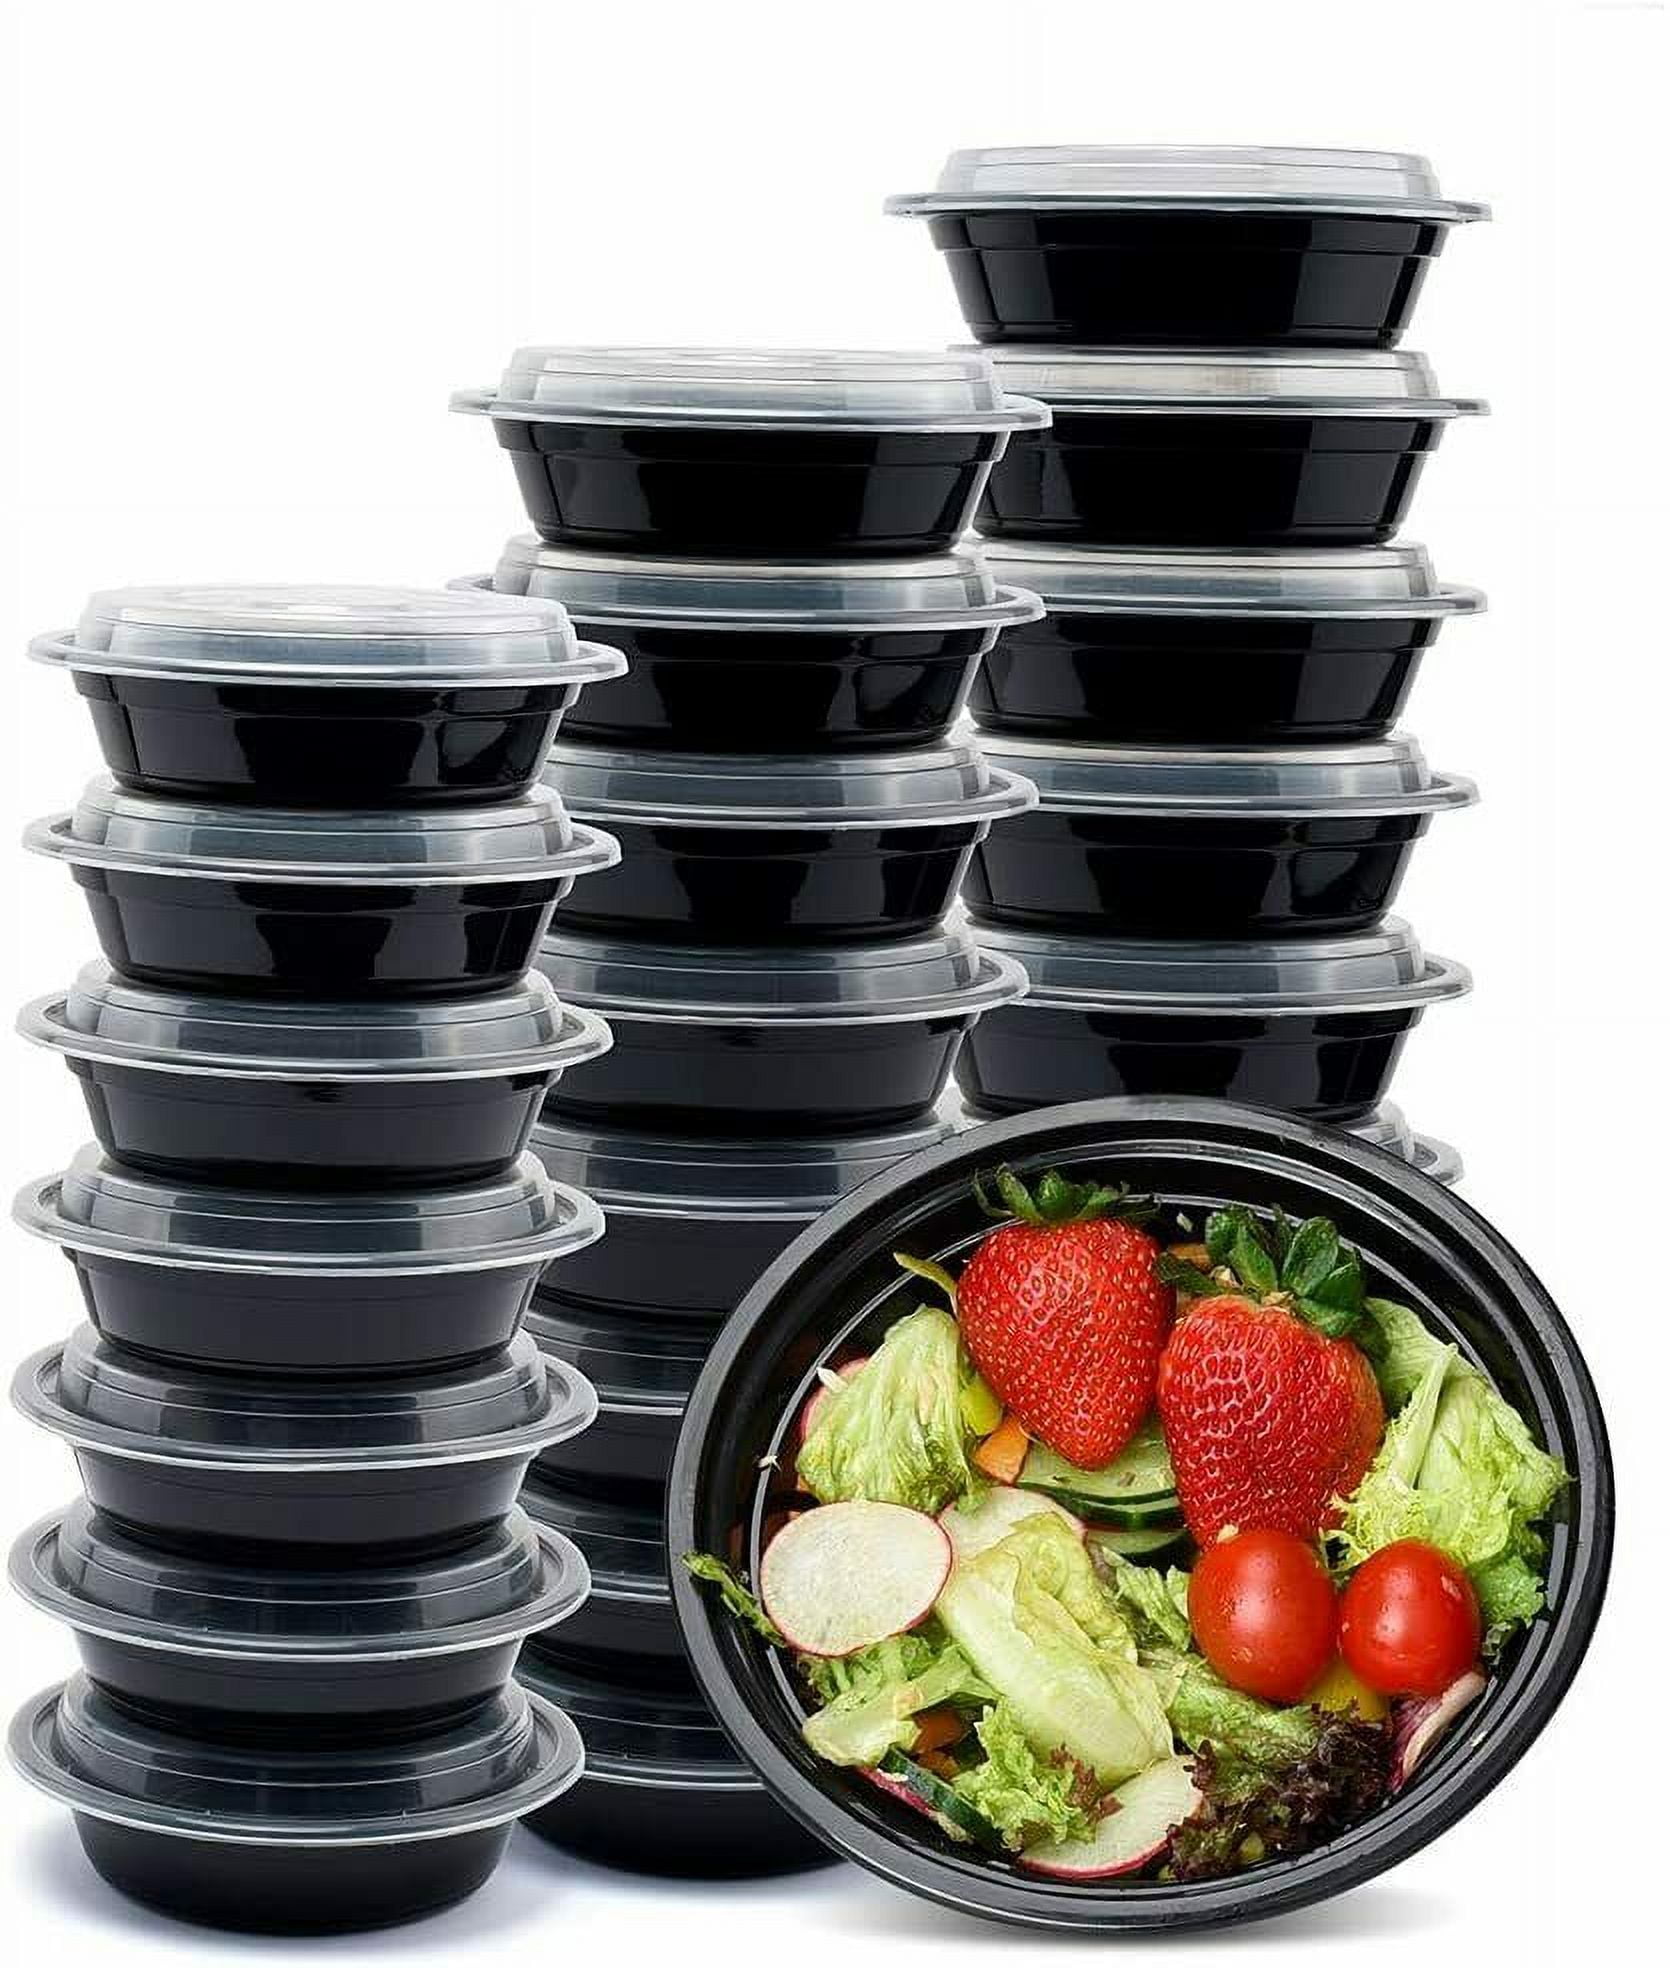 10 Set 32oz Round Meal Prep Containers with Lids Heavy Duty Microwavable